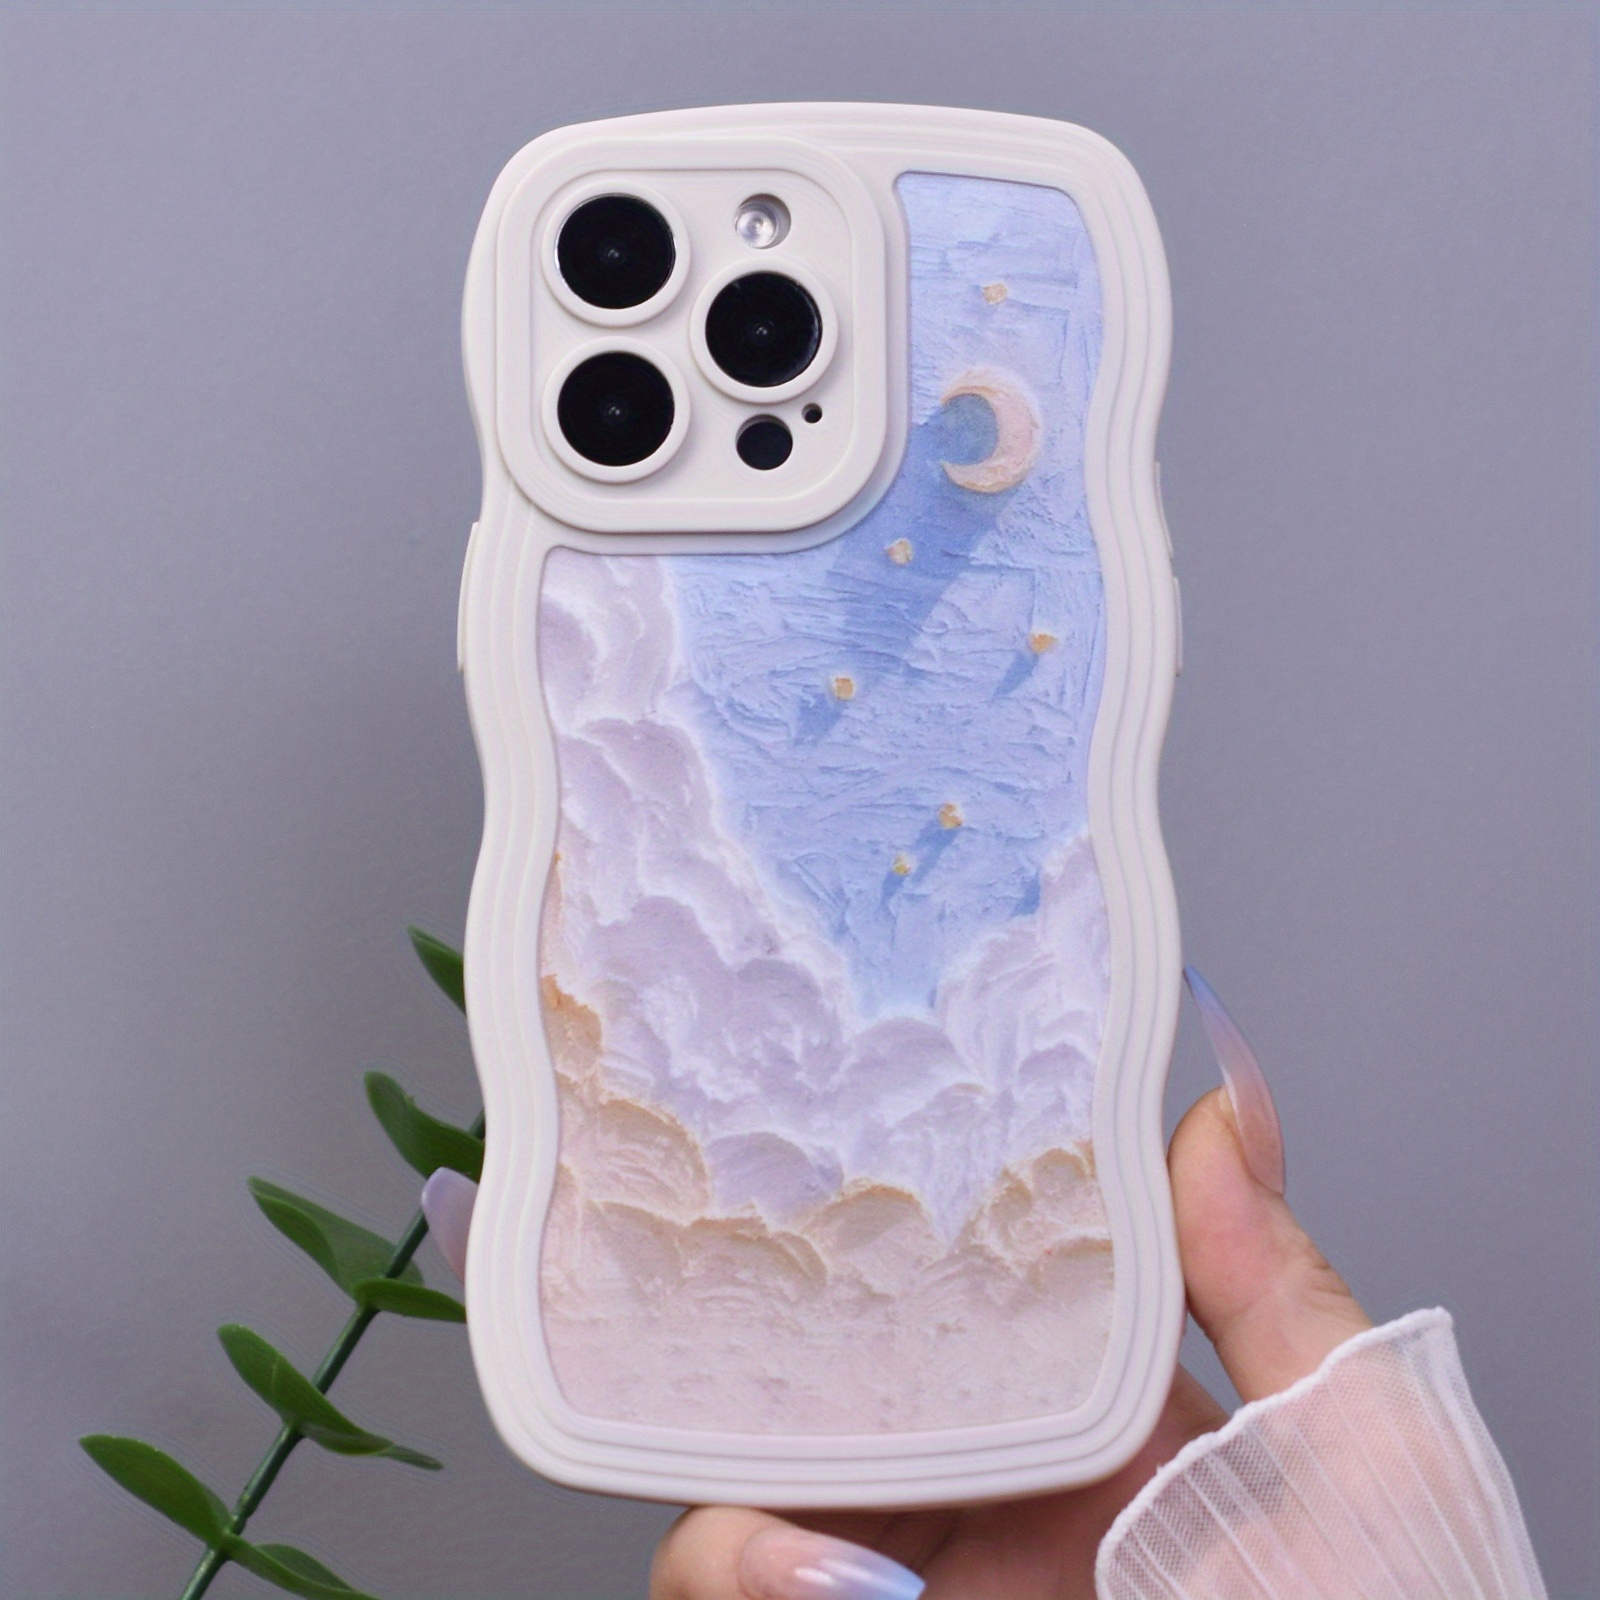 3 pcs epoxy Resin Personalized Mobile Phone case DIY Silicone case for  iPhone12/12pro (Note:Product are not Resin Mold, They are 2 pcs Bumper Soft  and